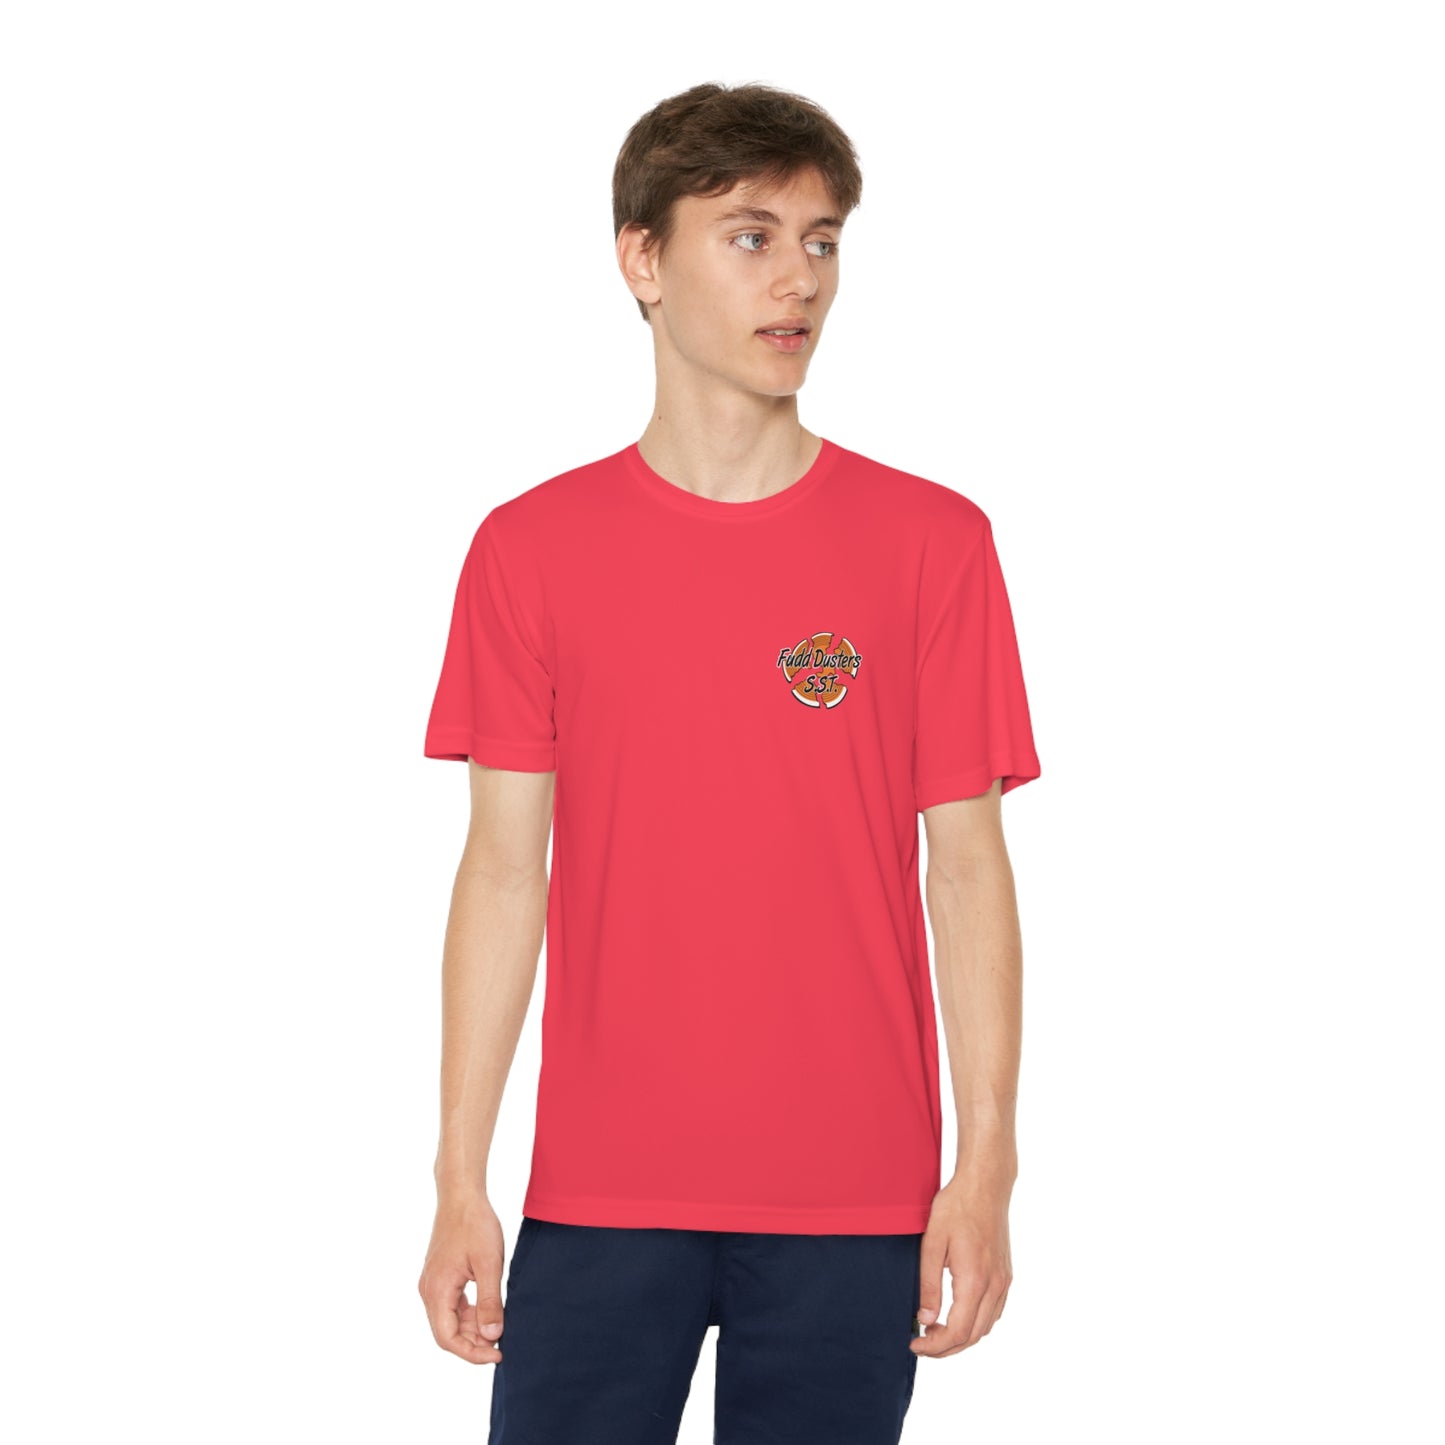 Fudduster Youth Tee